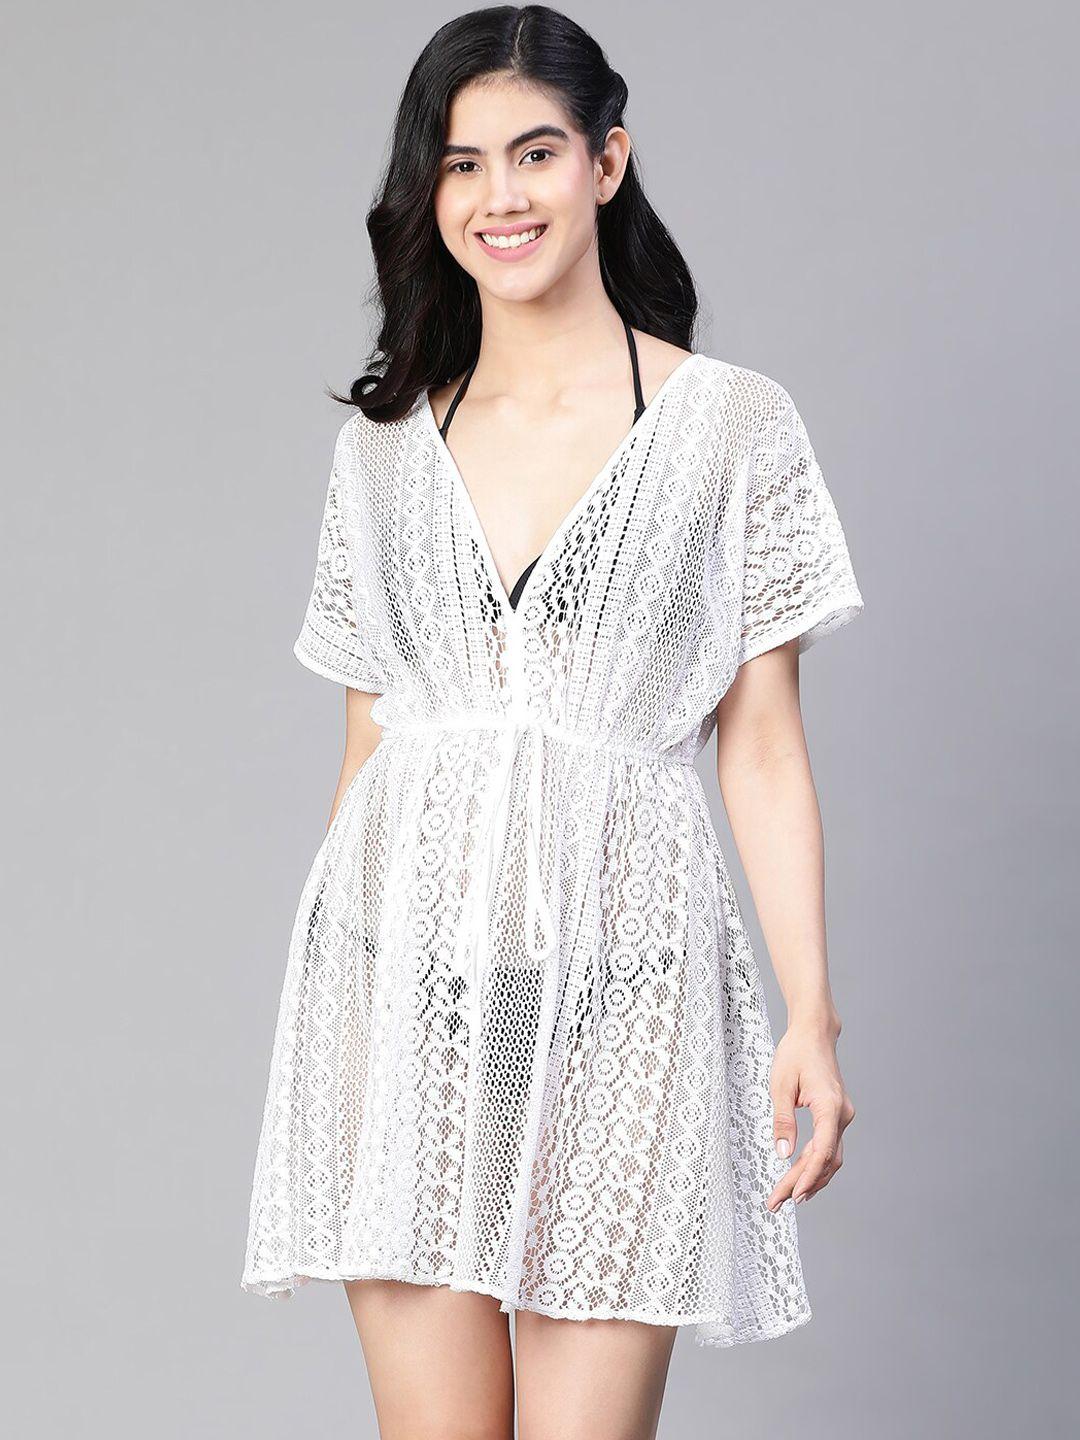 oxolloxo self design cotton cover-up dress